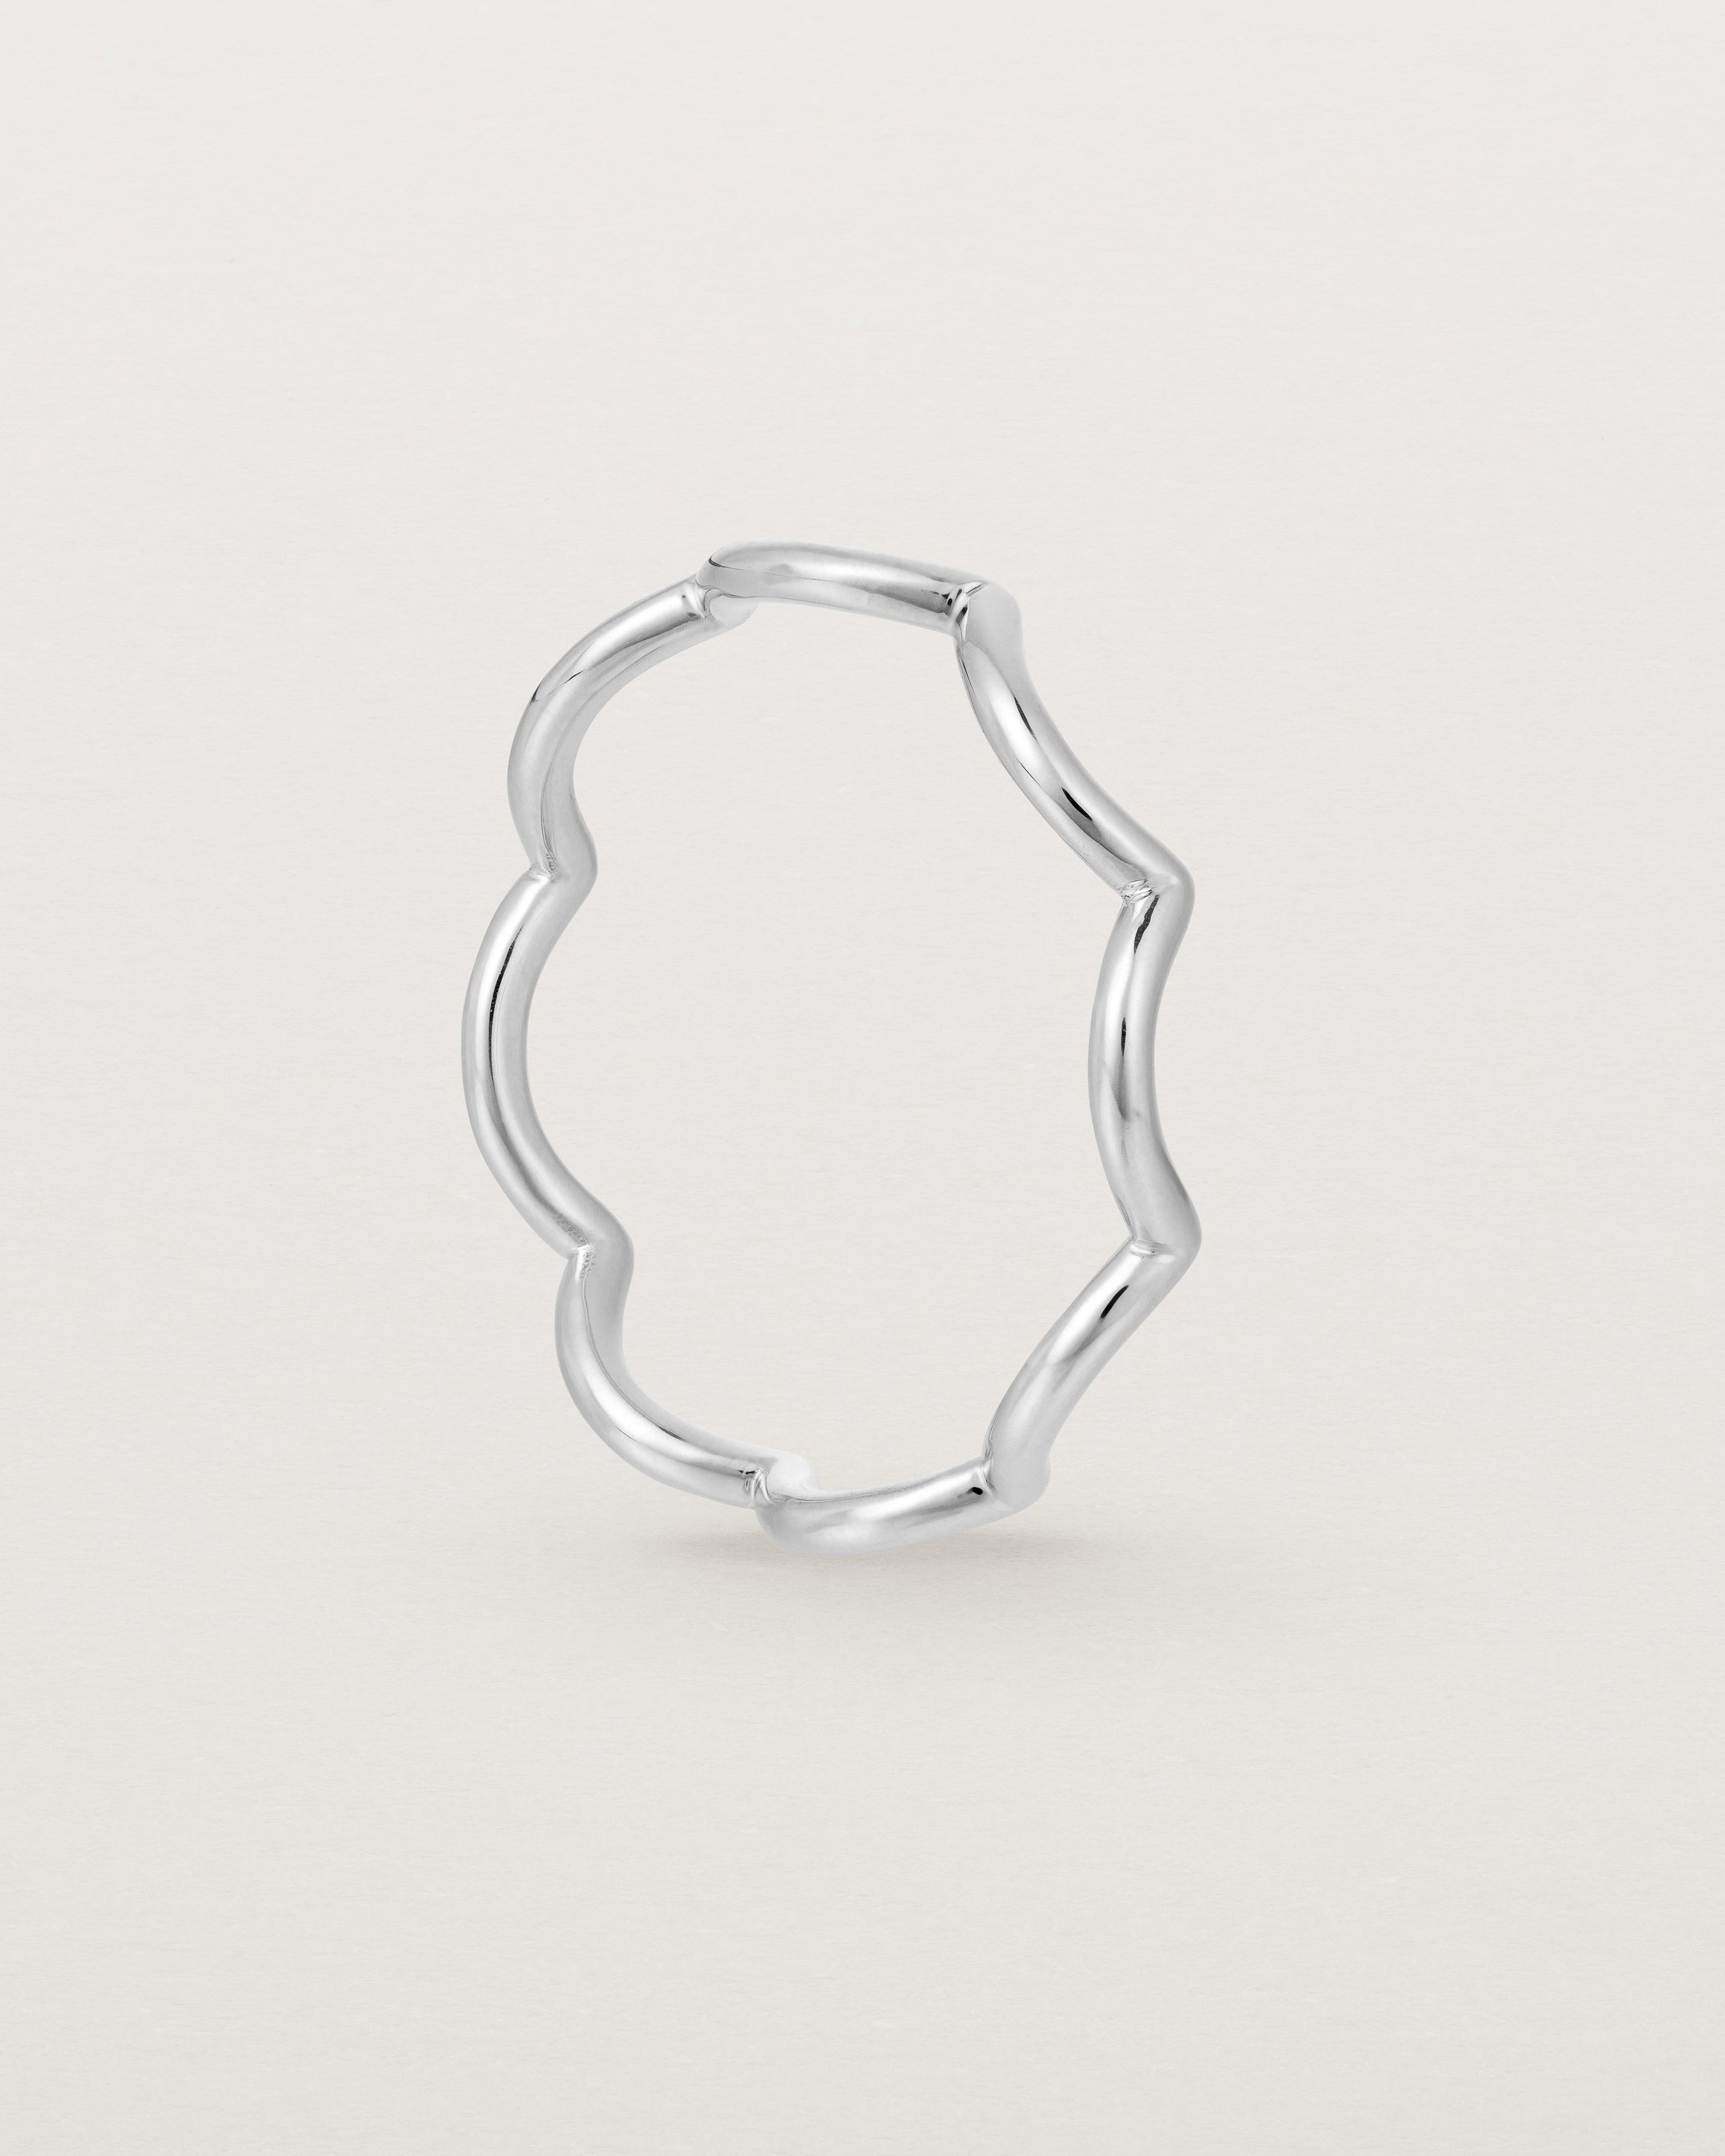 Standing view of the Lai Ring in Sterling Silver